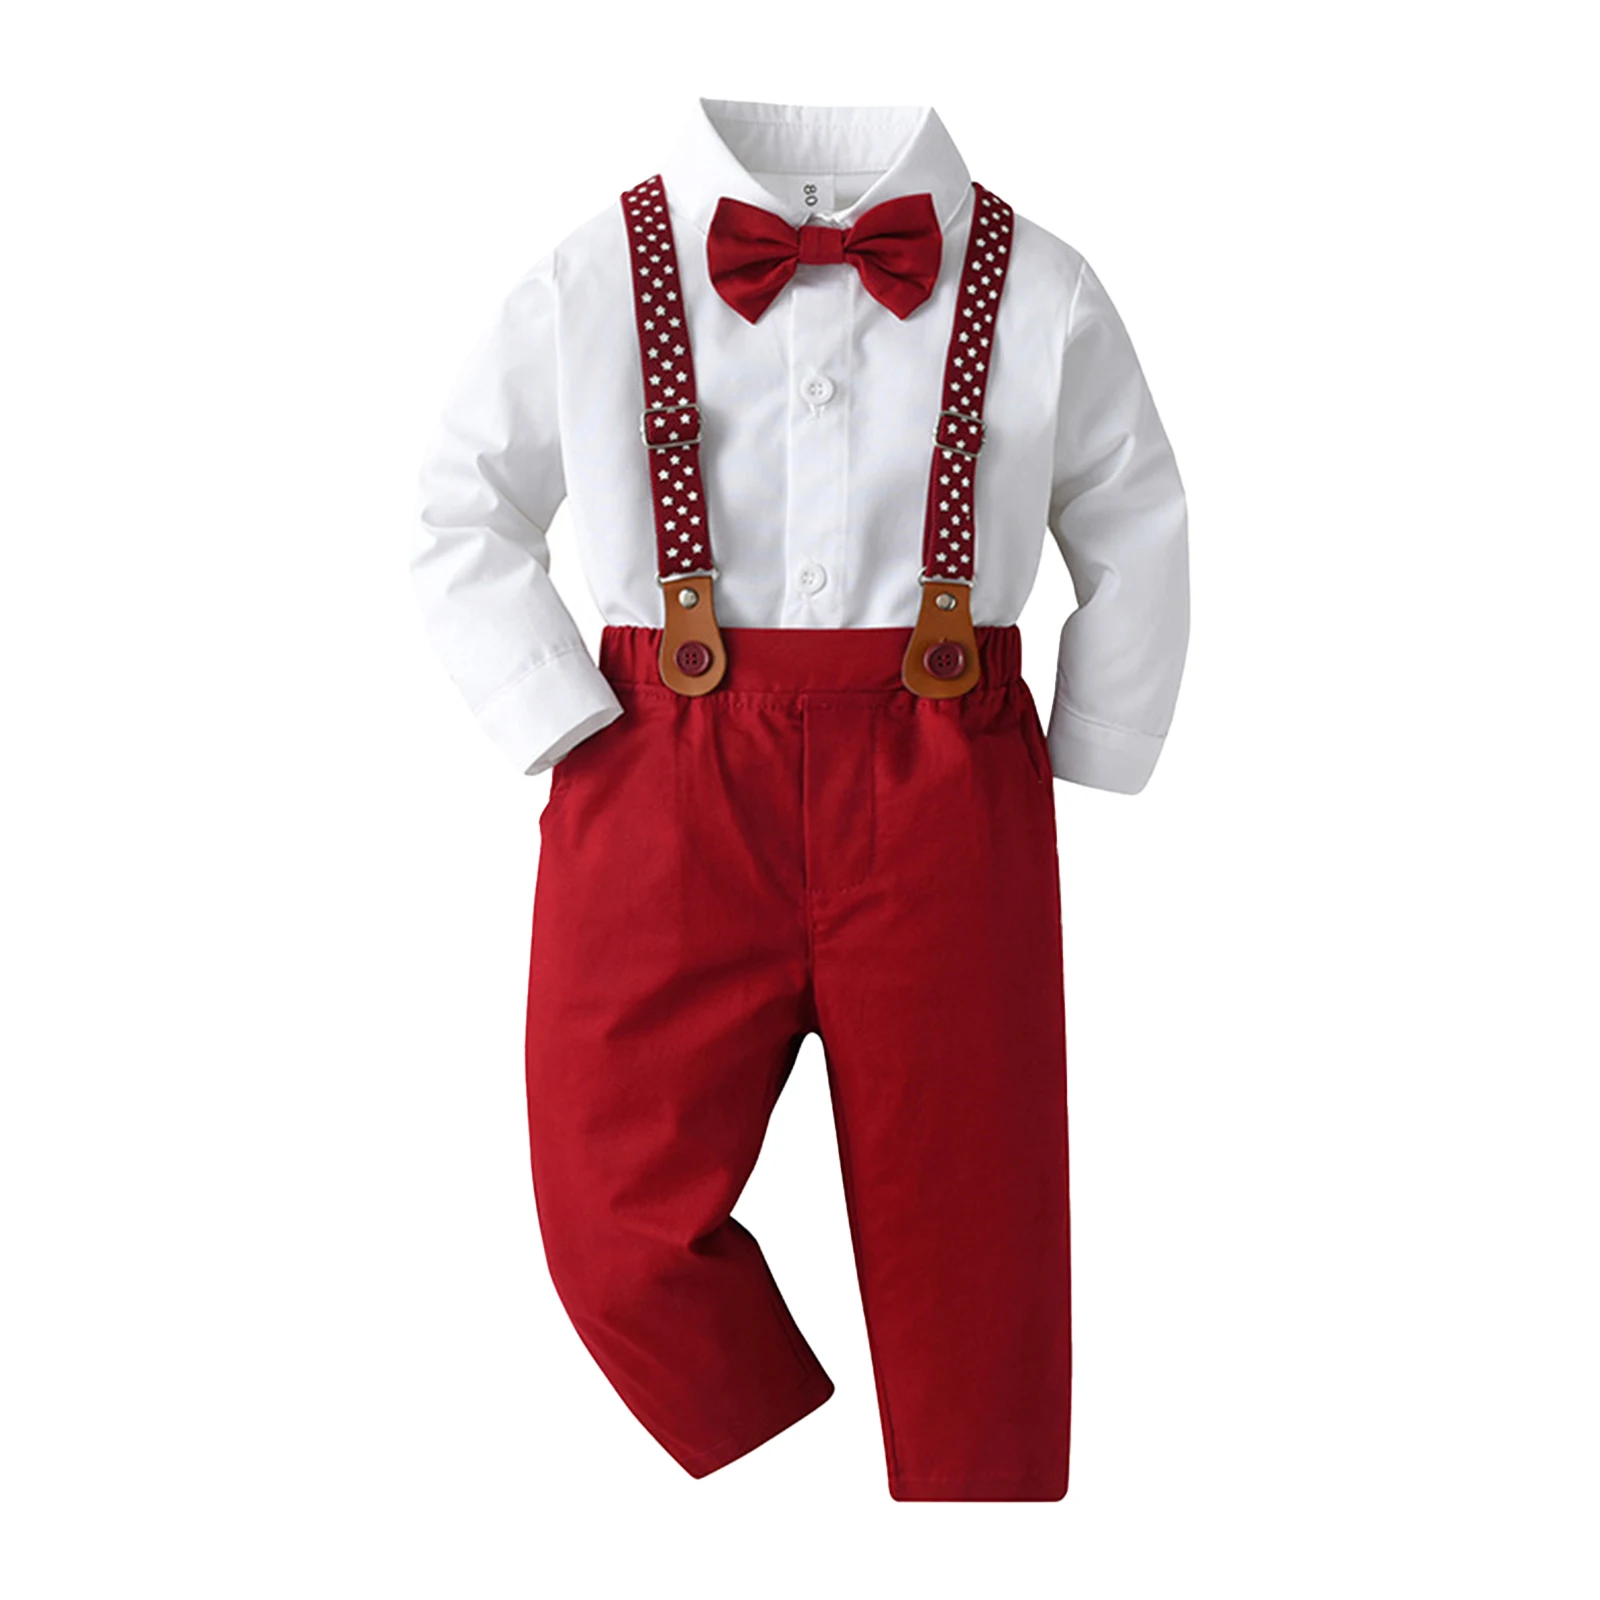 Baby Boys Gentleman Outfit Cotton Clothes Birthday Party Wedding Prom Gown Long Sleeve Shirt Top+Bowtie+Suspender Pants 3Pcs/Set men s new traditional native mens pant suits solid color long gentleman mature modern ethnic african shirt